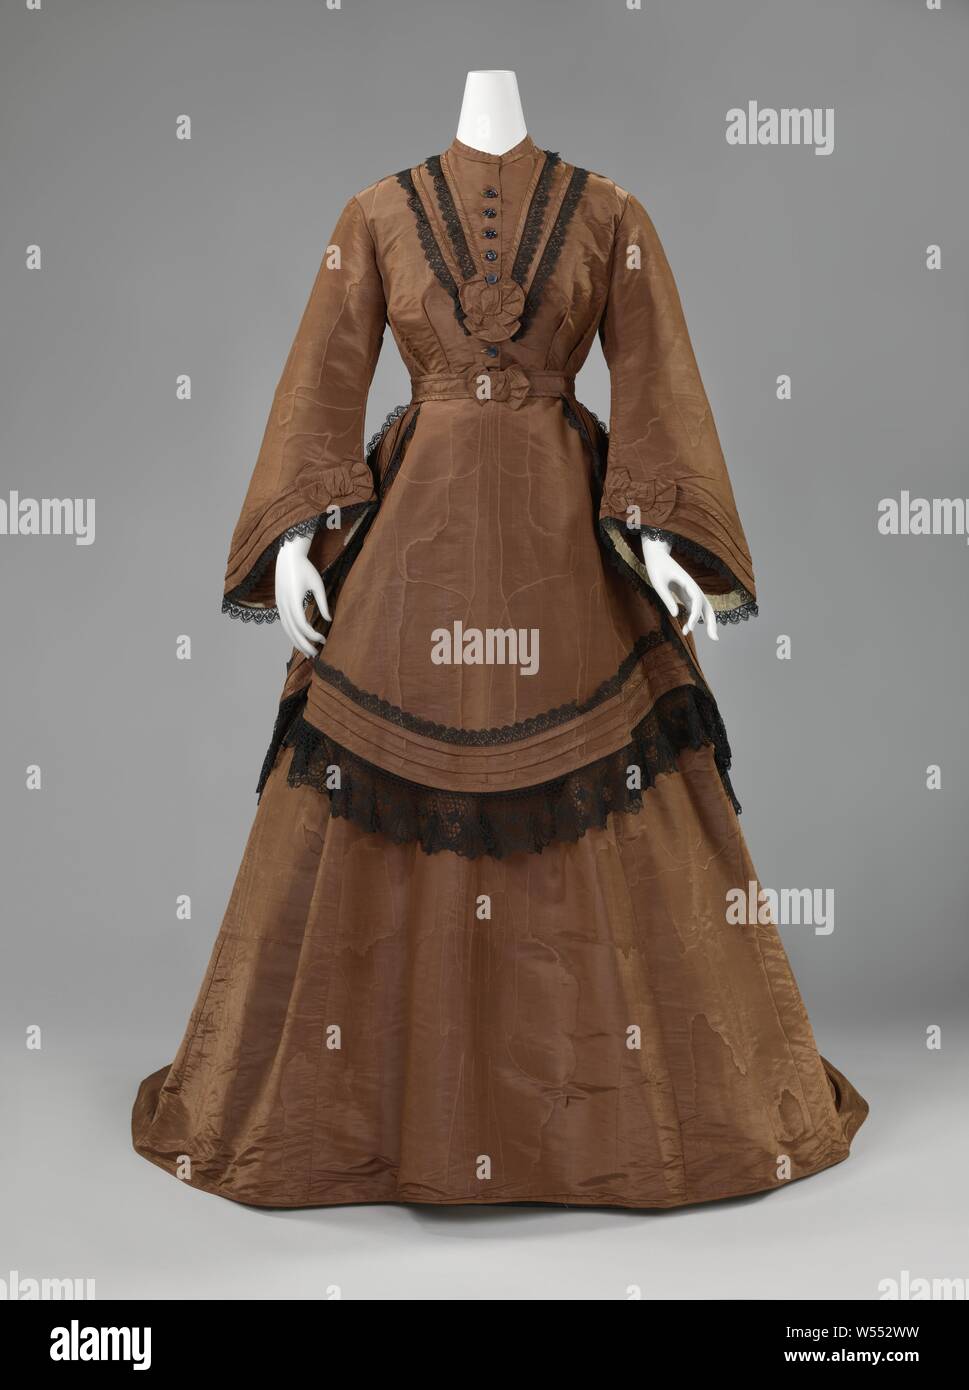 1860s pagoda dress for my doll! : r/HistoricalCostuming